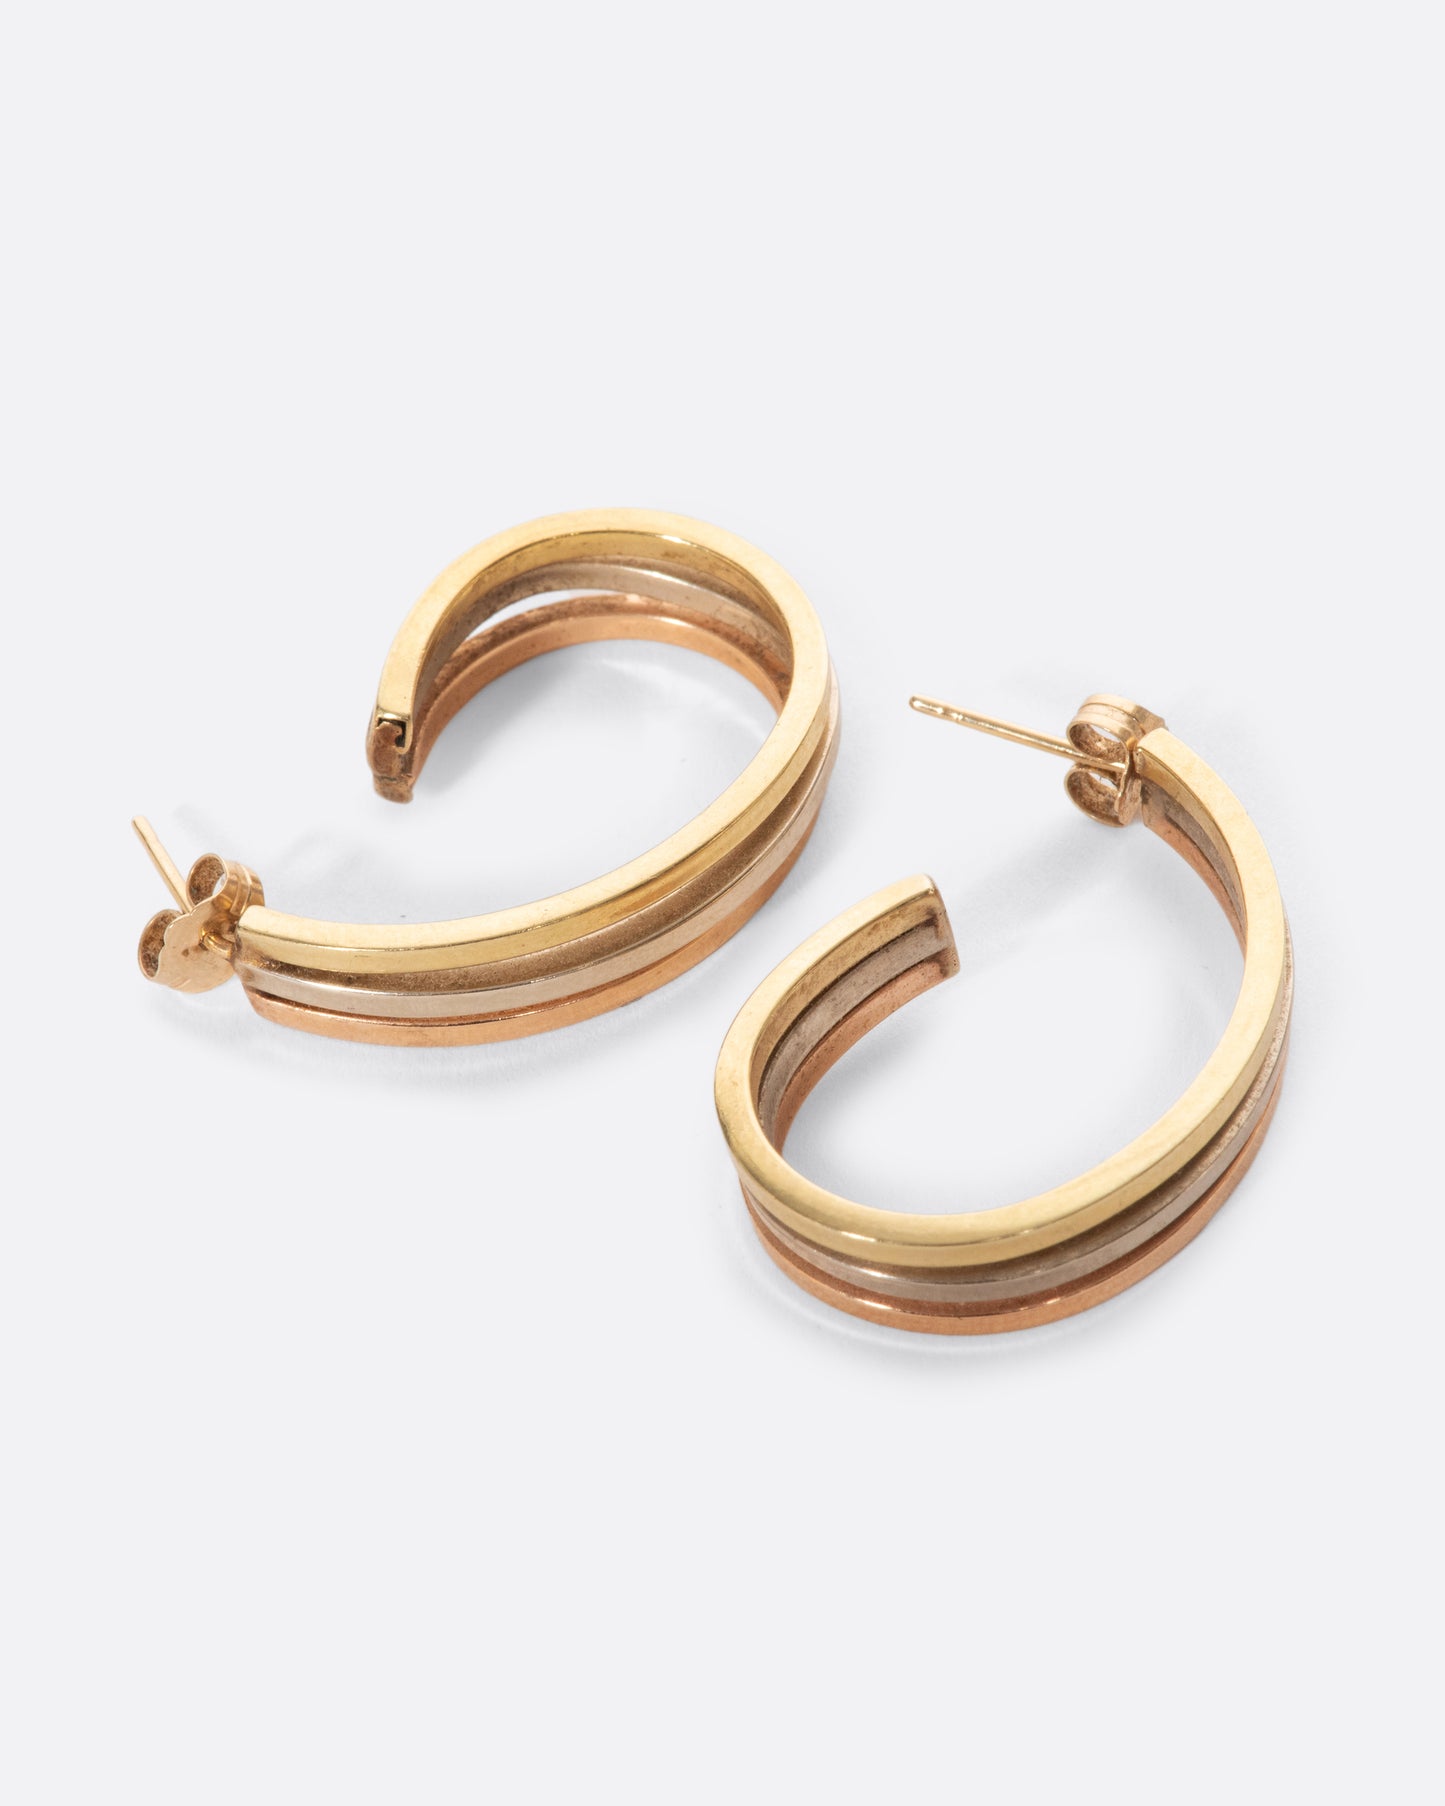 A pair of vintage yellow, white, and rose gold earrings. They curl elegantly under your ear, offering exceptional wearability with the beautiful mix of metals.